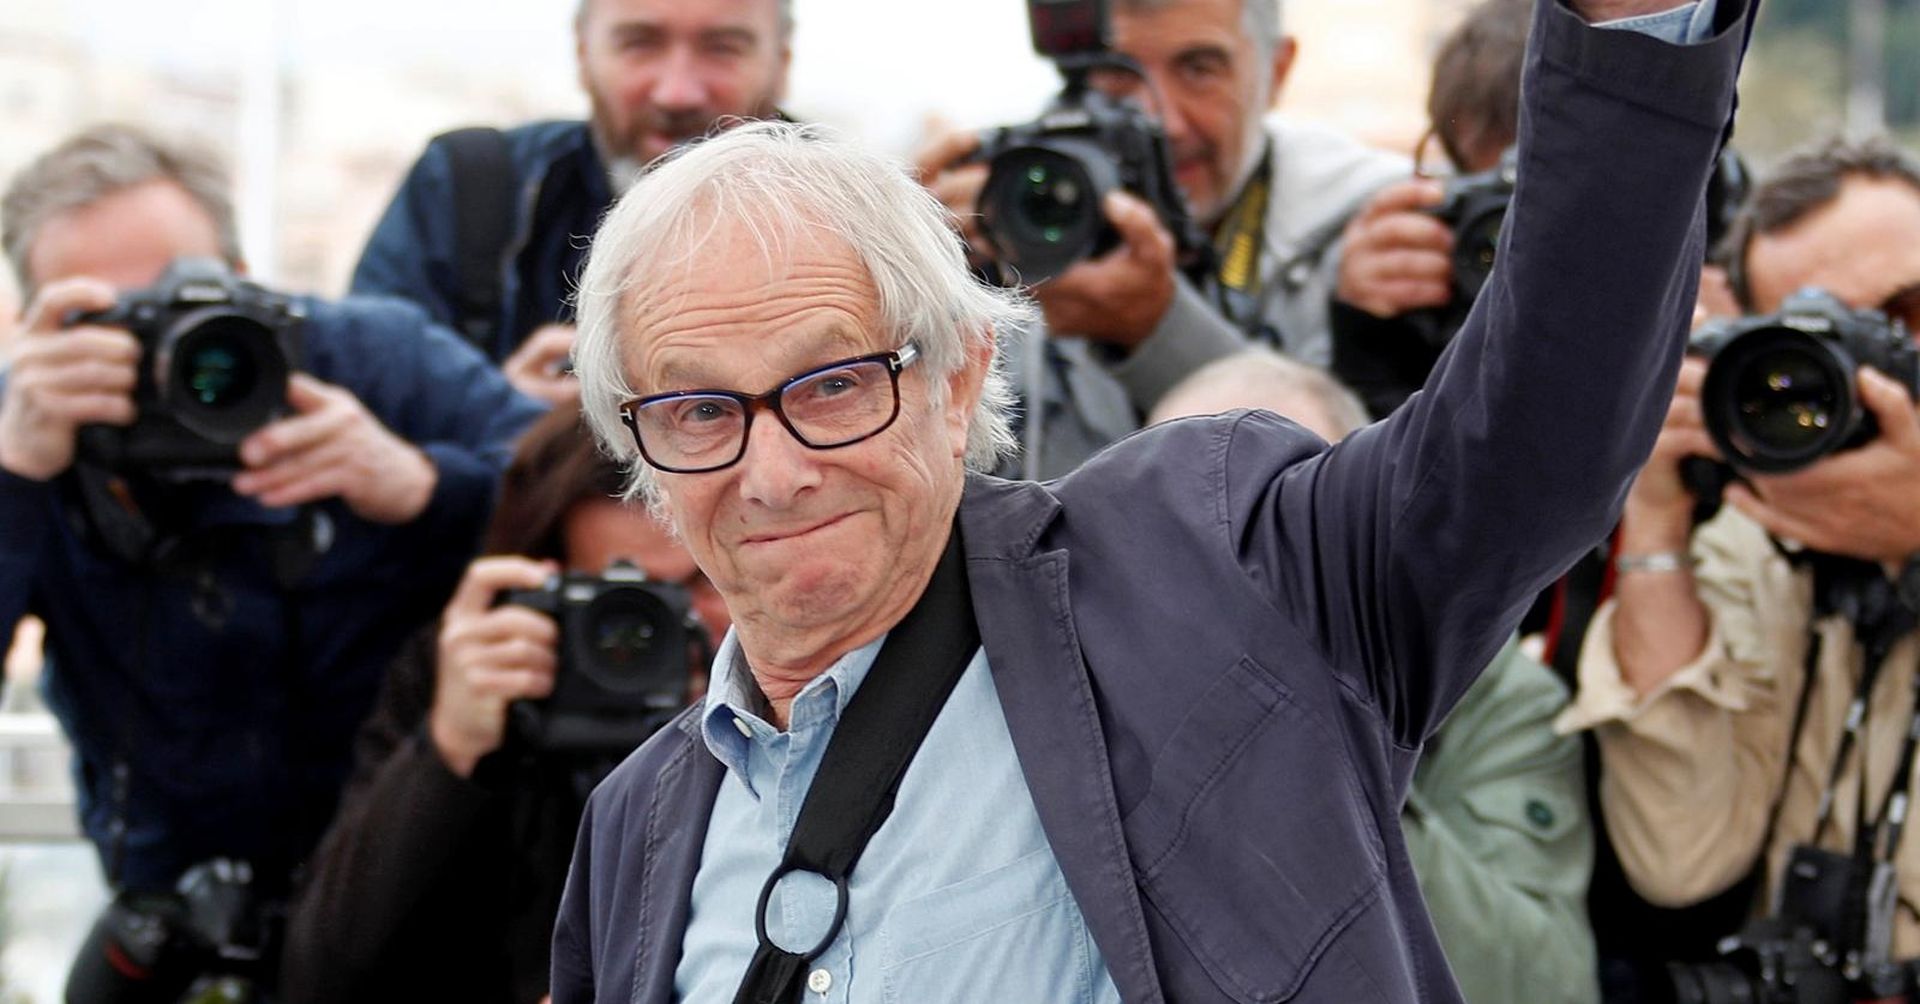 72nd Cannes Film Festival - Photocall for the film "Sorry We Missed You" in competition 72nd Cannes Film Festival - Photocall for the film "Sorry We Missed You" in competition - Cannes, France, May 17, 2019. Director Ken Loach gestures. REUTERS/Eric Gaillard     TPX IMAGES OF THE DAY ERIC GAILLARD